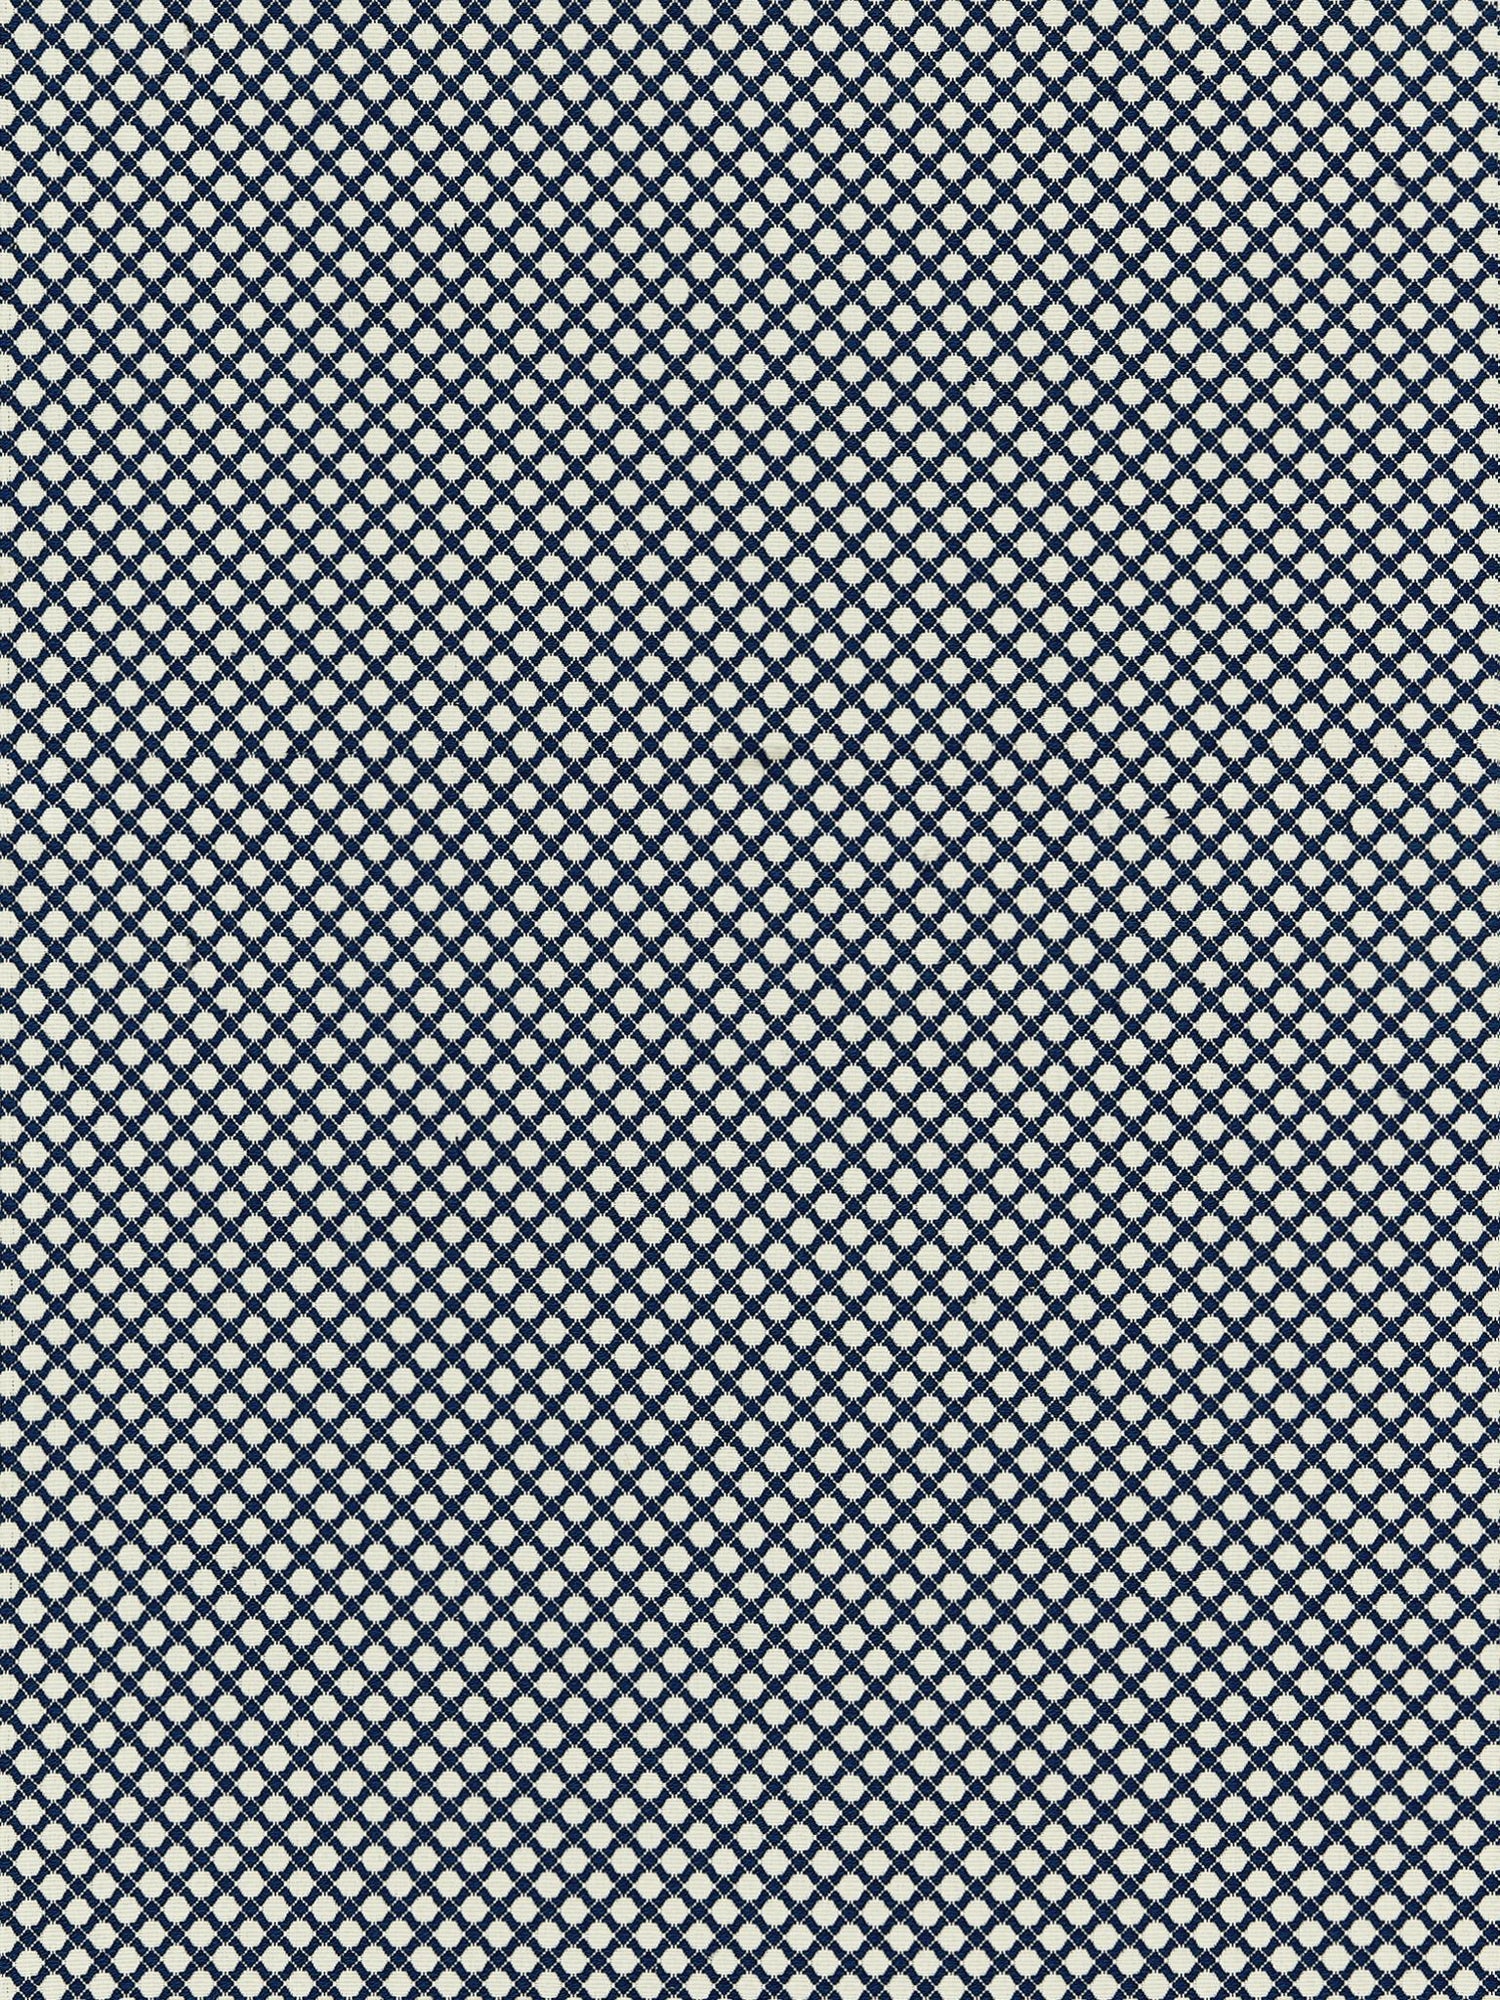 Bellaire Trellis fabric in indigo color - pattern number BK 0005K65121 - by Scalamandre in the Old World Weavers collection